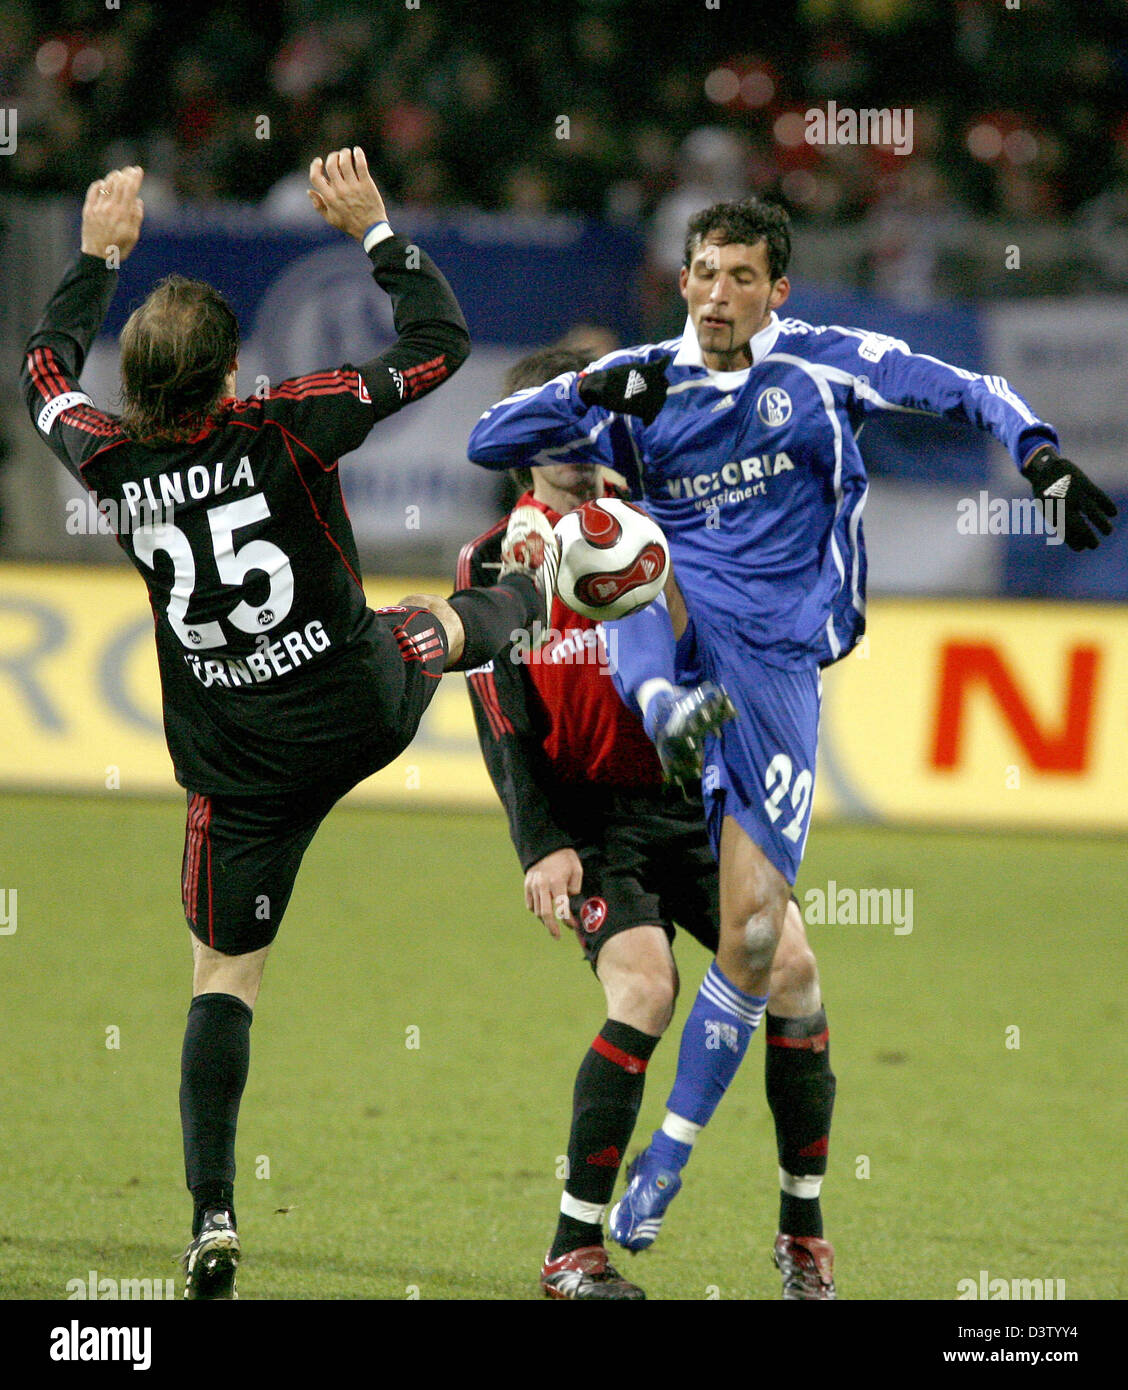 Kevin Kuranyi (R) of Schalke vies for the ball with Nuremberg's Horacio Javier Pinola during the Bundesliga match 1. FC Nuremberg vs FC Schalke 04 at easyCredit stadium in Nuremberg, Germany, Sunday, 03 December 2006. Photo: Daniel Karmann (ATTENTION: BLOCKING PERIOD! The DFL permits the further utilisation of the pictures in IPTV, mobile services and other new technologies only tw Stock Photo